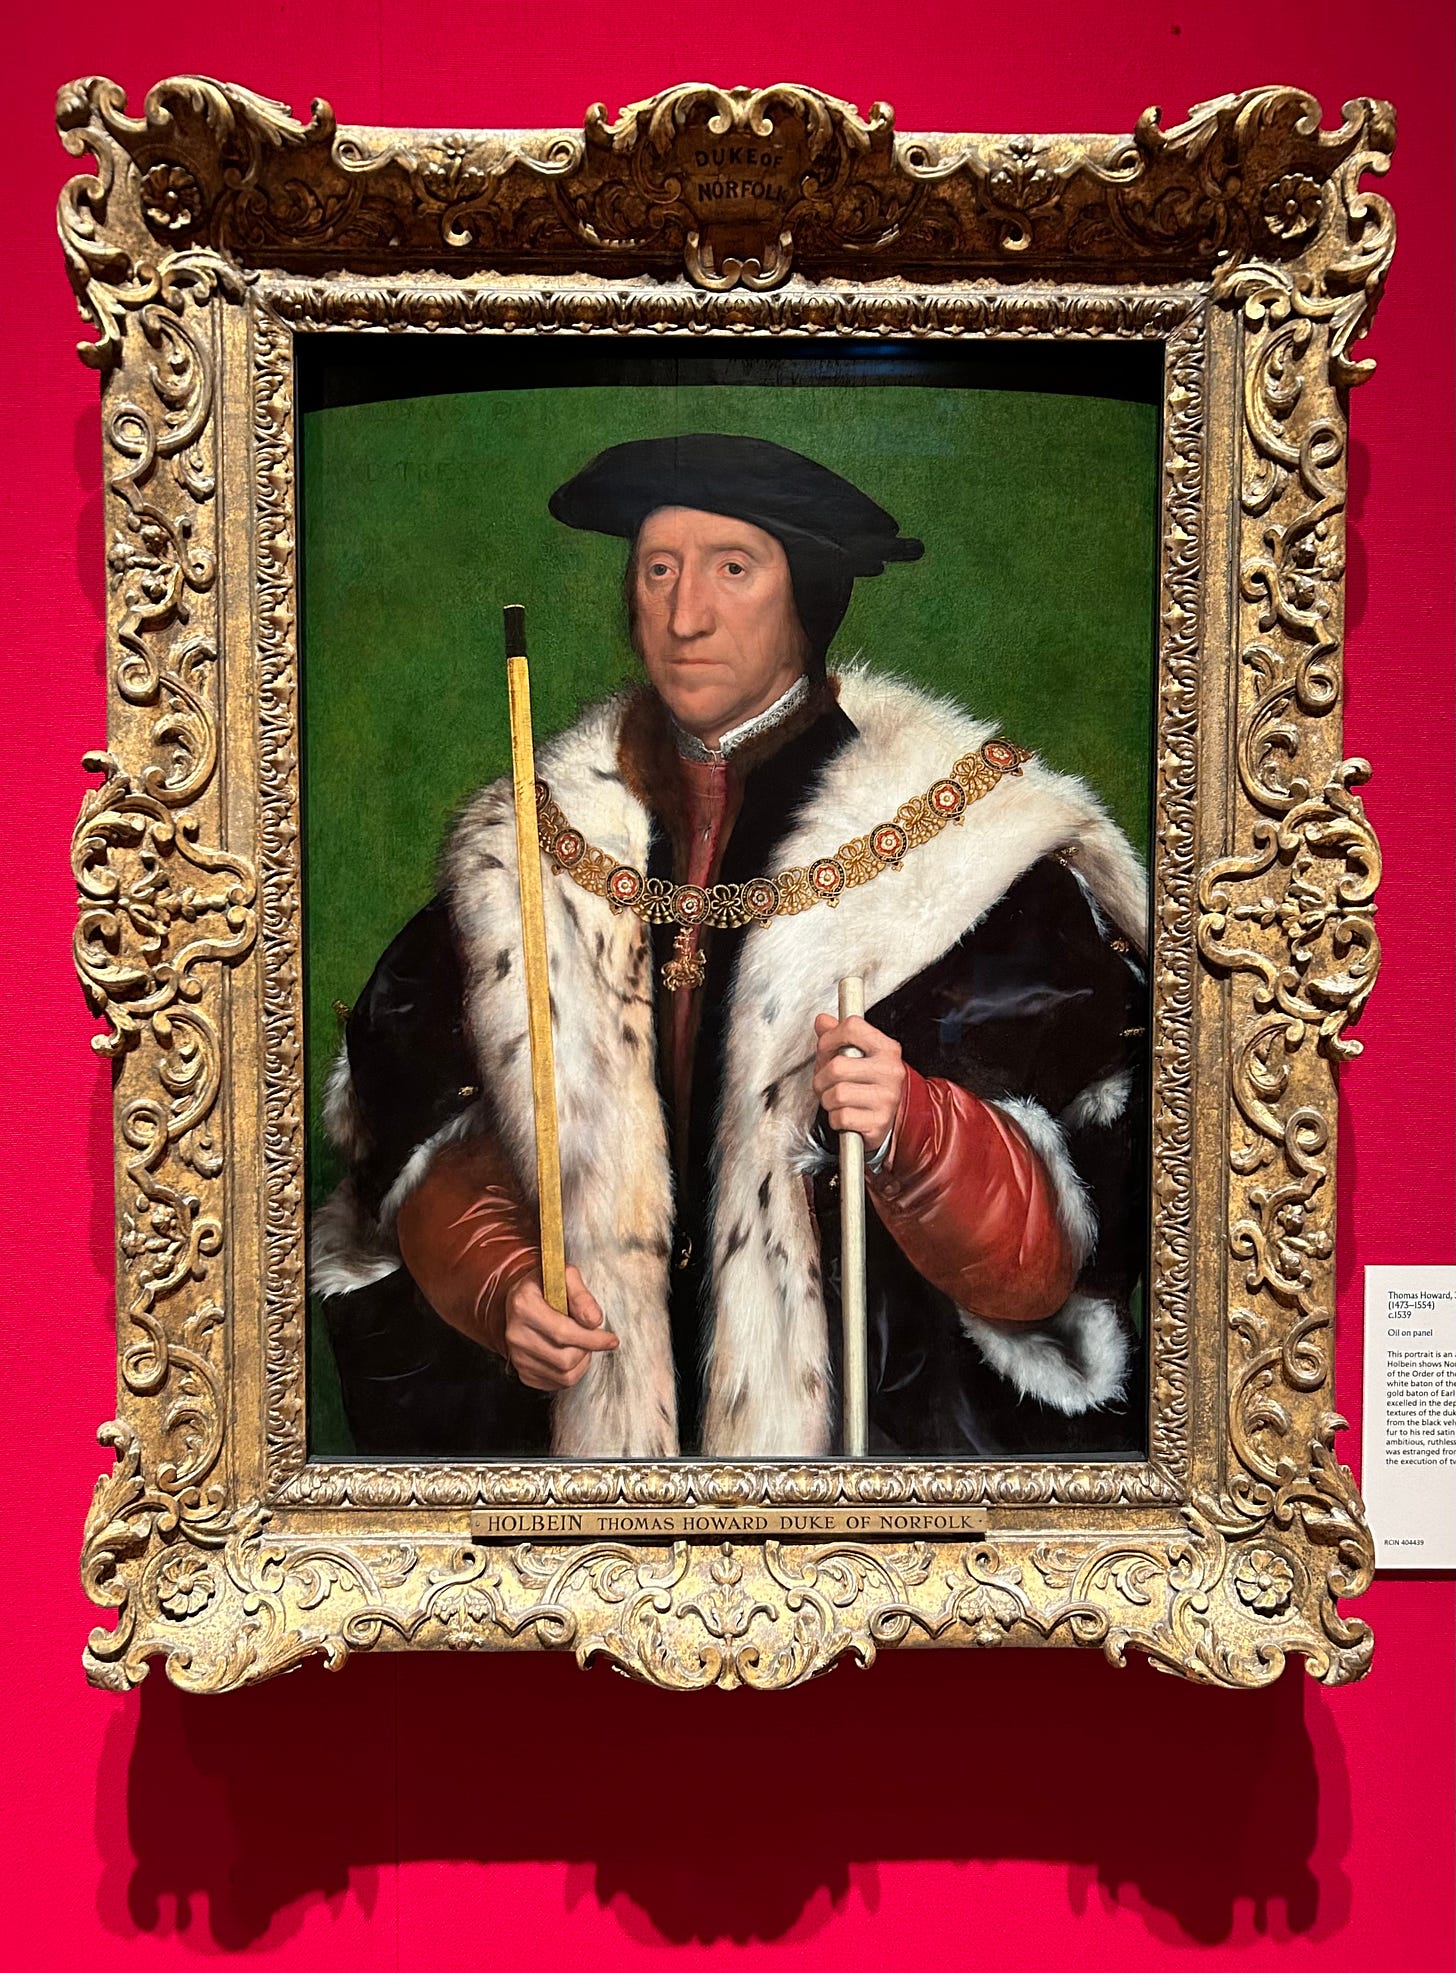 A painting of Thomas Howard, Duke of Norfolk. He is holding two staffs of office, dressed richly in furs and a gold chain. He has a thin face.